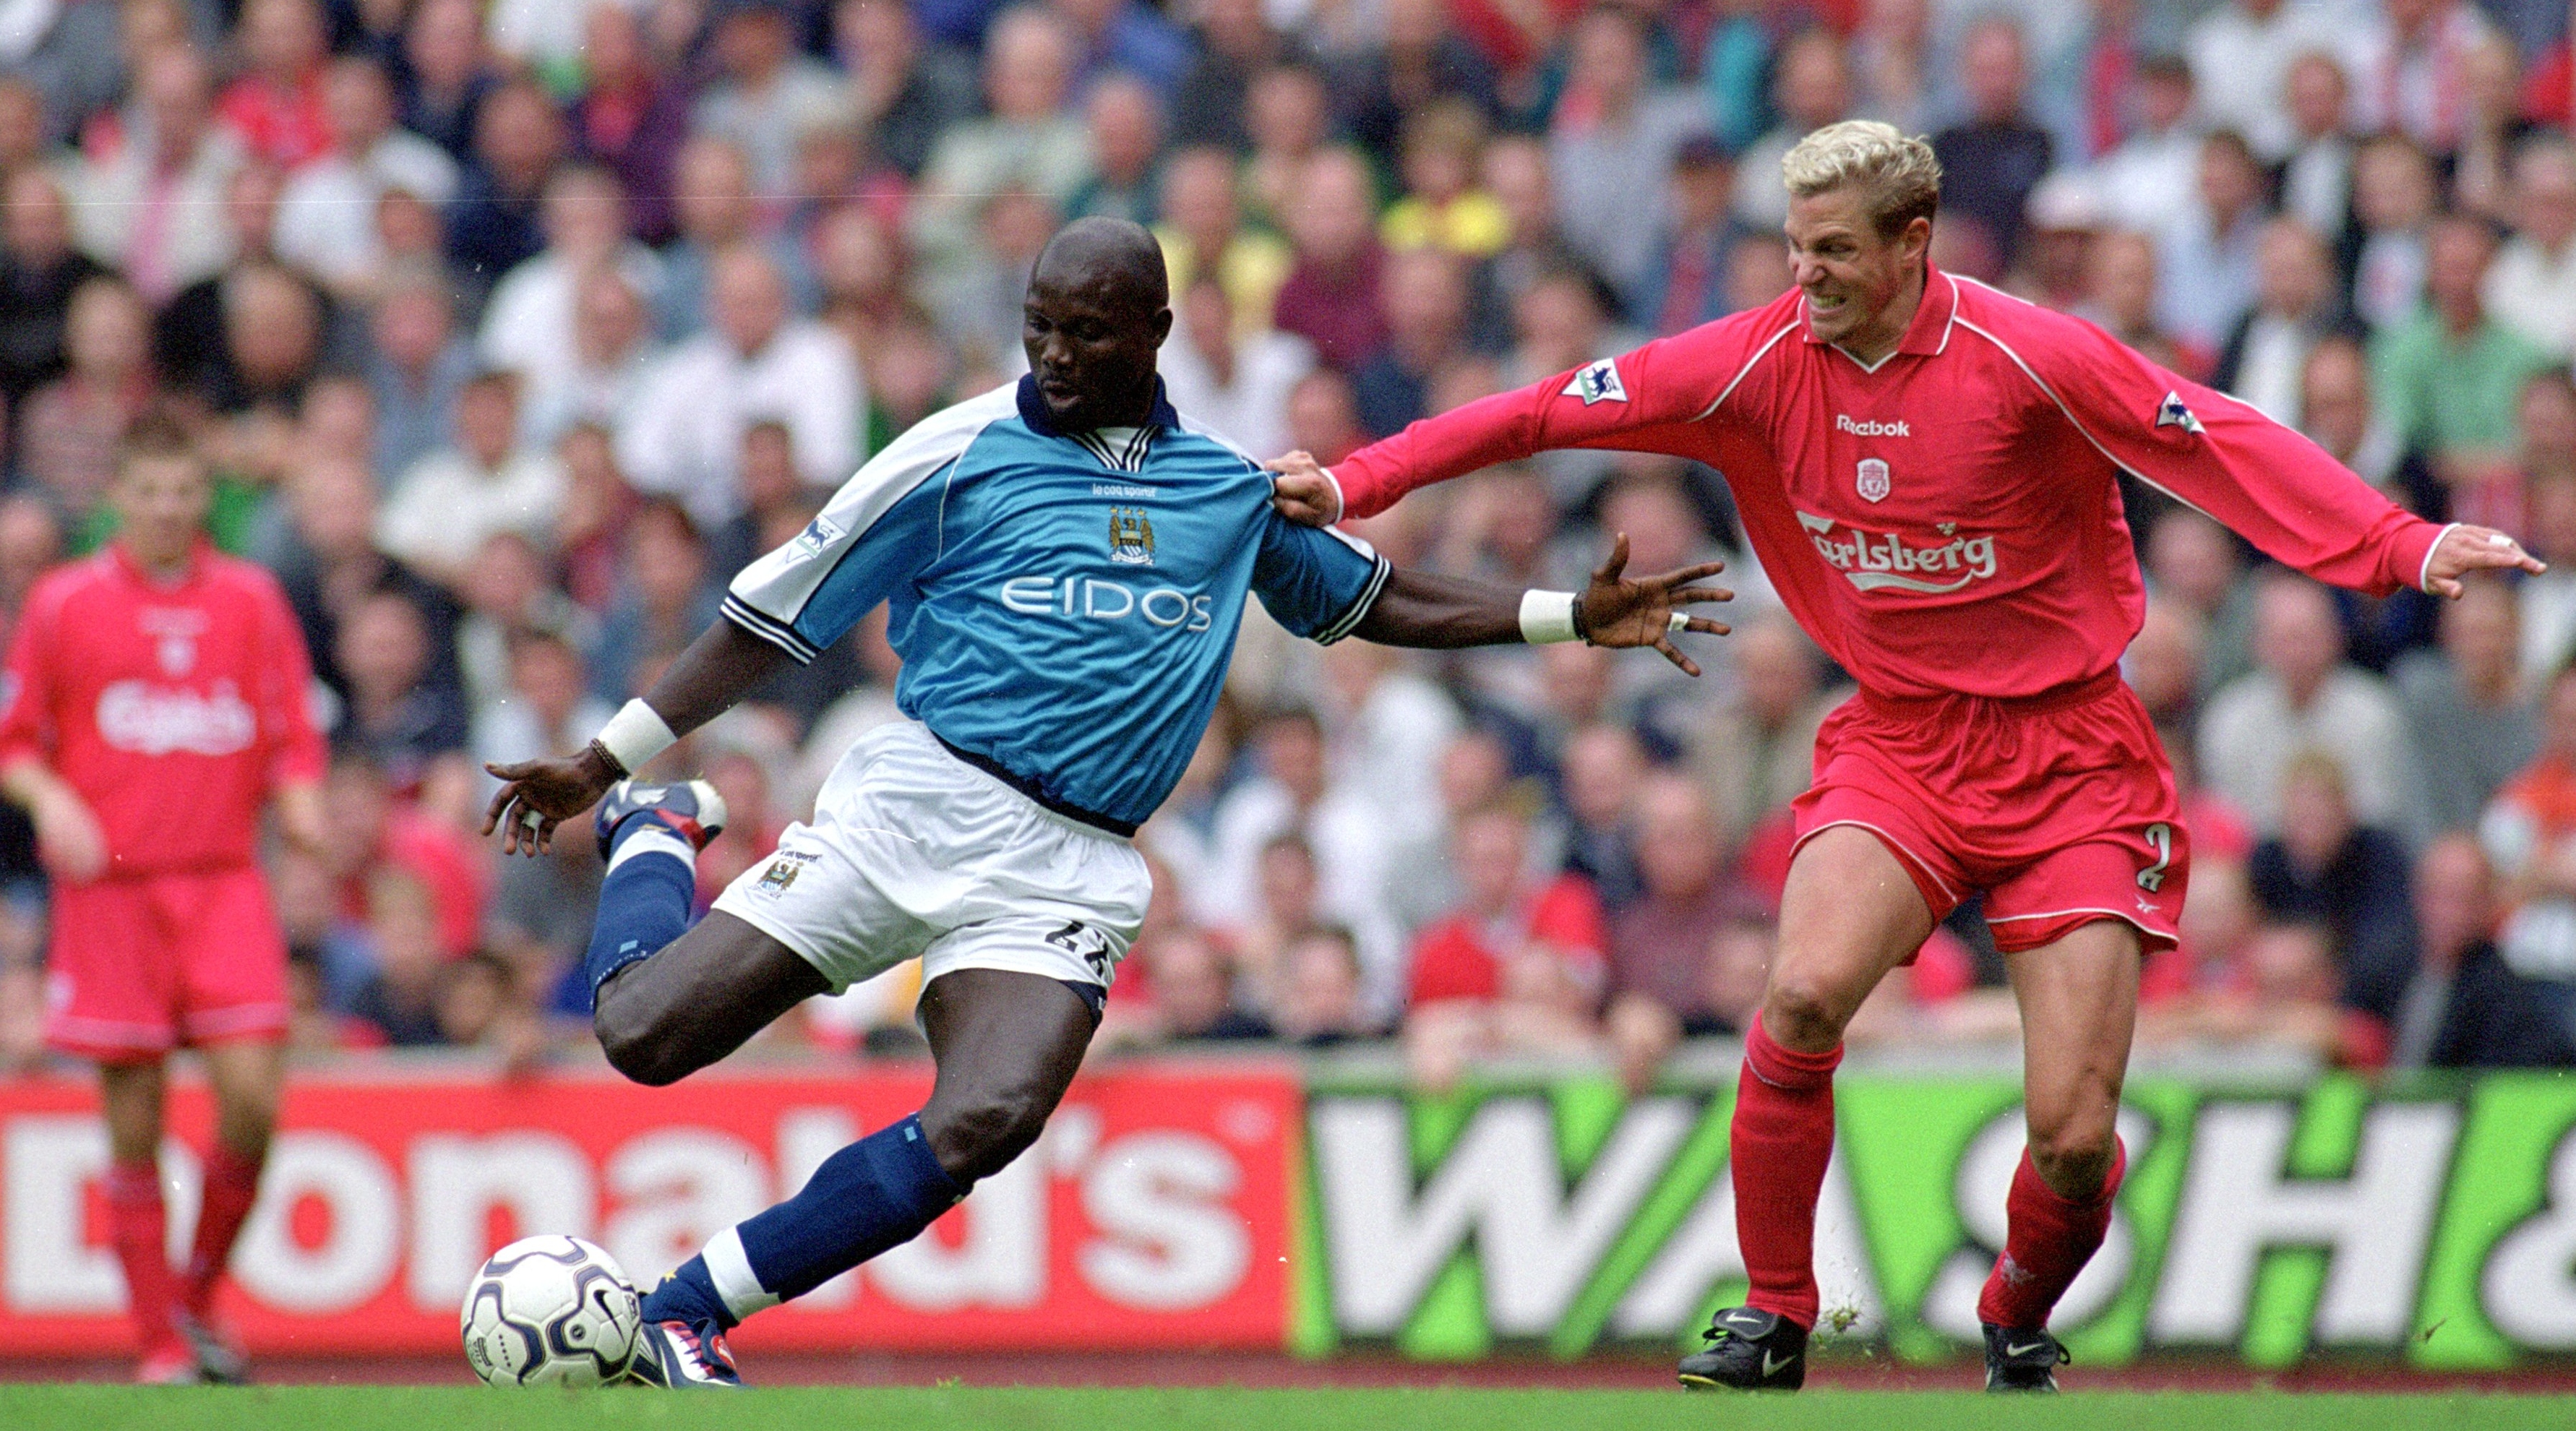 9 Sep 2000: George Weah of Manchester City scores City's first goal during the FA Carling Premiership match against Liverpool at Anfield, in Liverpool, England. Liverpool won the match 3-2.  Mandatory Credit: Aubrey Washington /Allsport